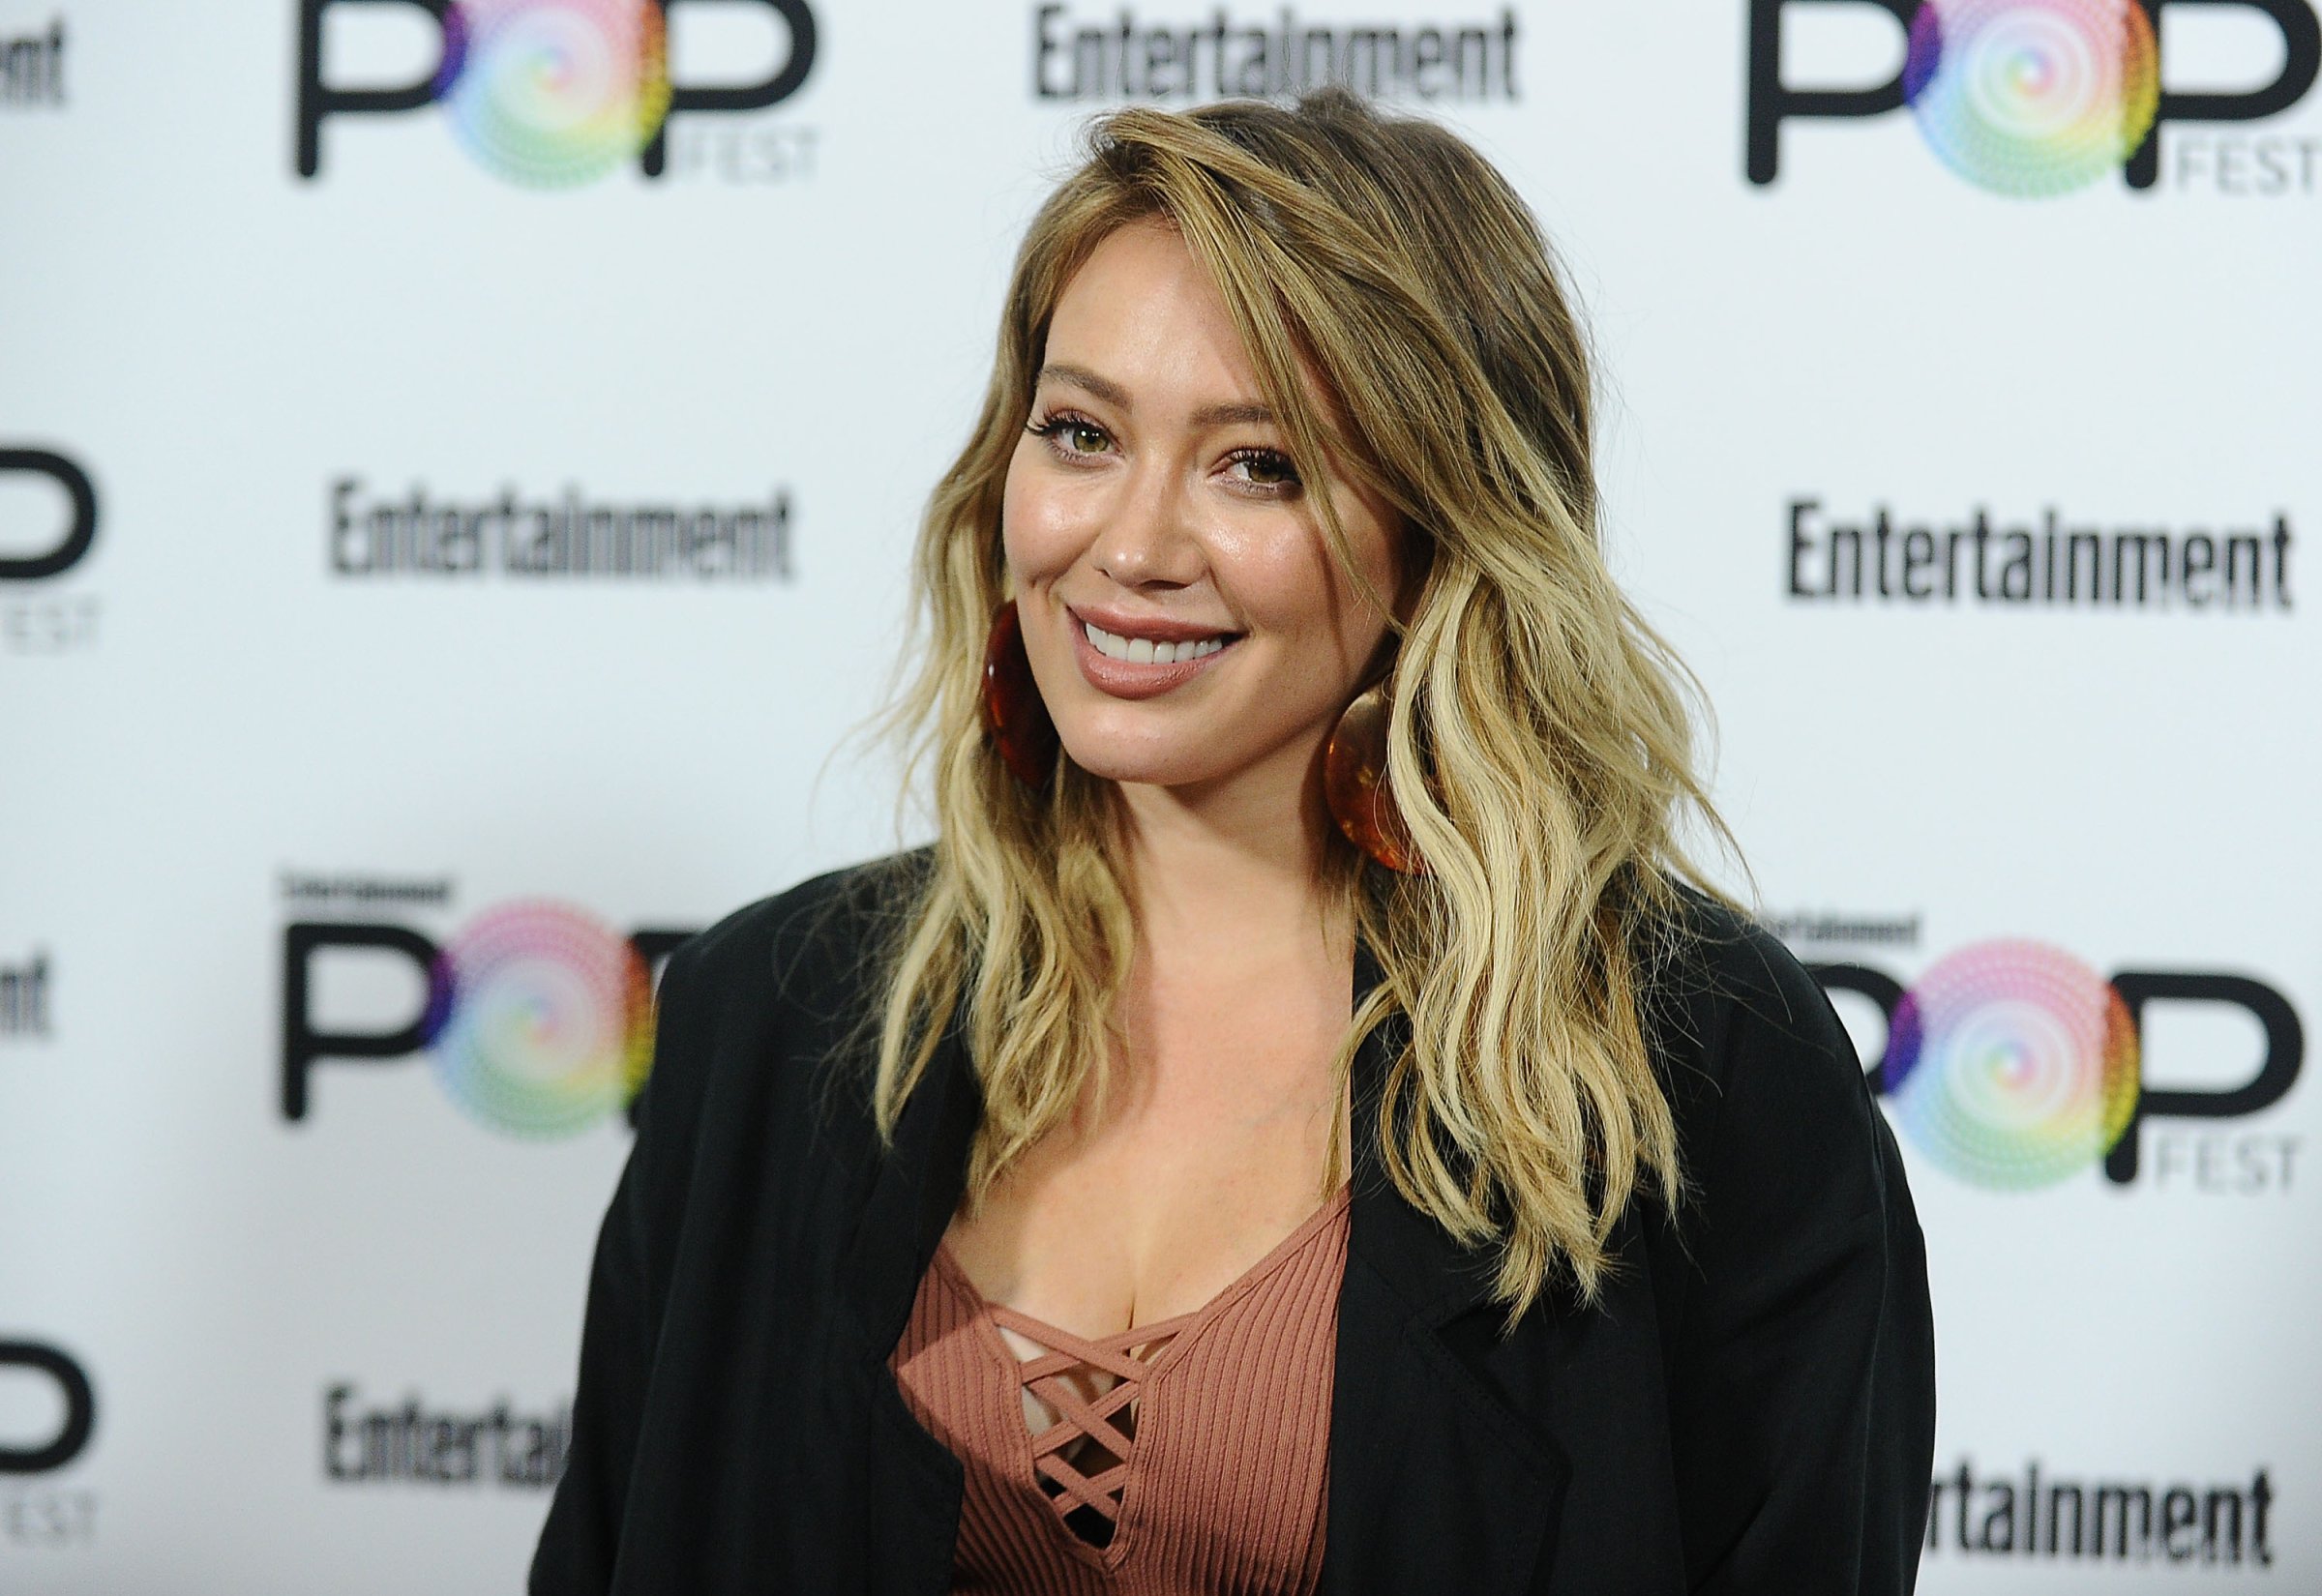 Actress Hilary Duff attends Entertainment Weekly's Popfest at The Reef on October 30, 2016 in Los Angeles, California.